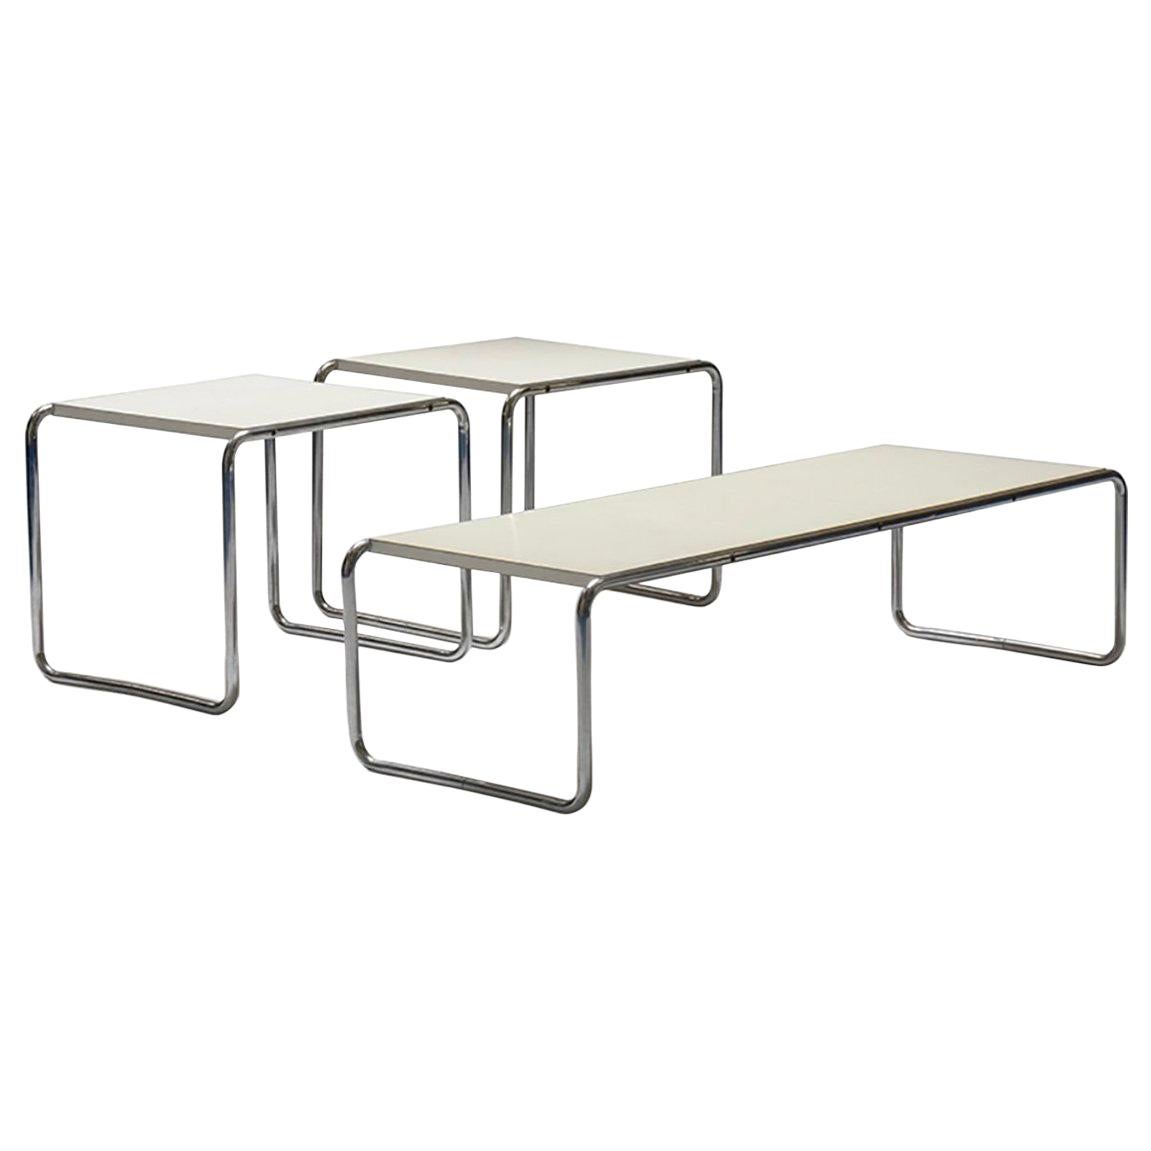 Set of Marcel Breuer Laccio Side Tables and Coffee Table